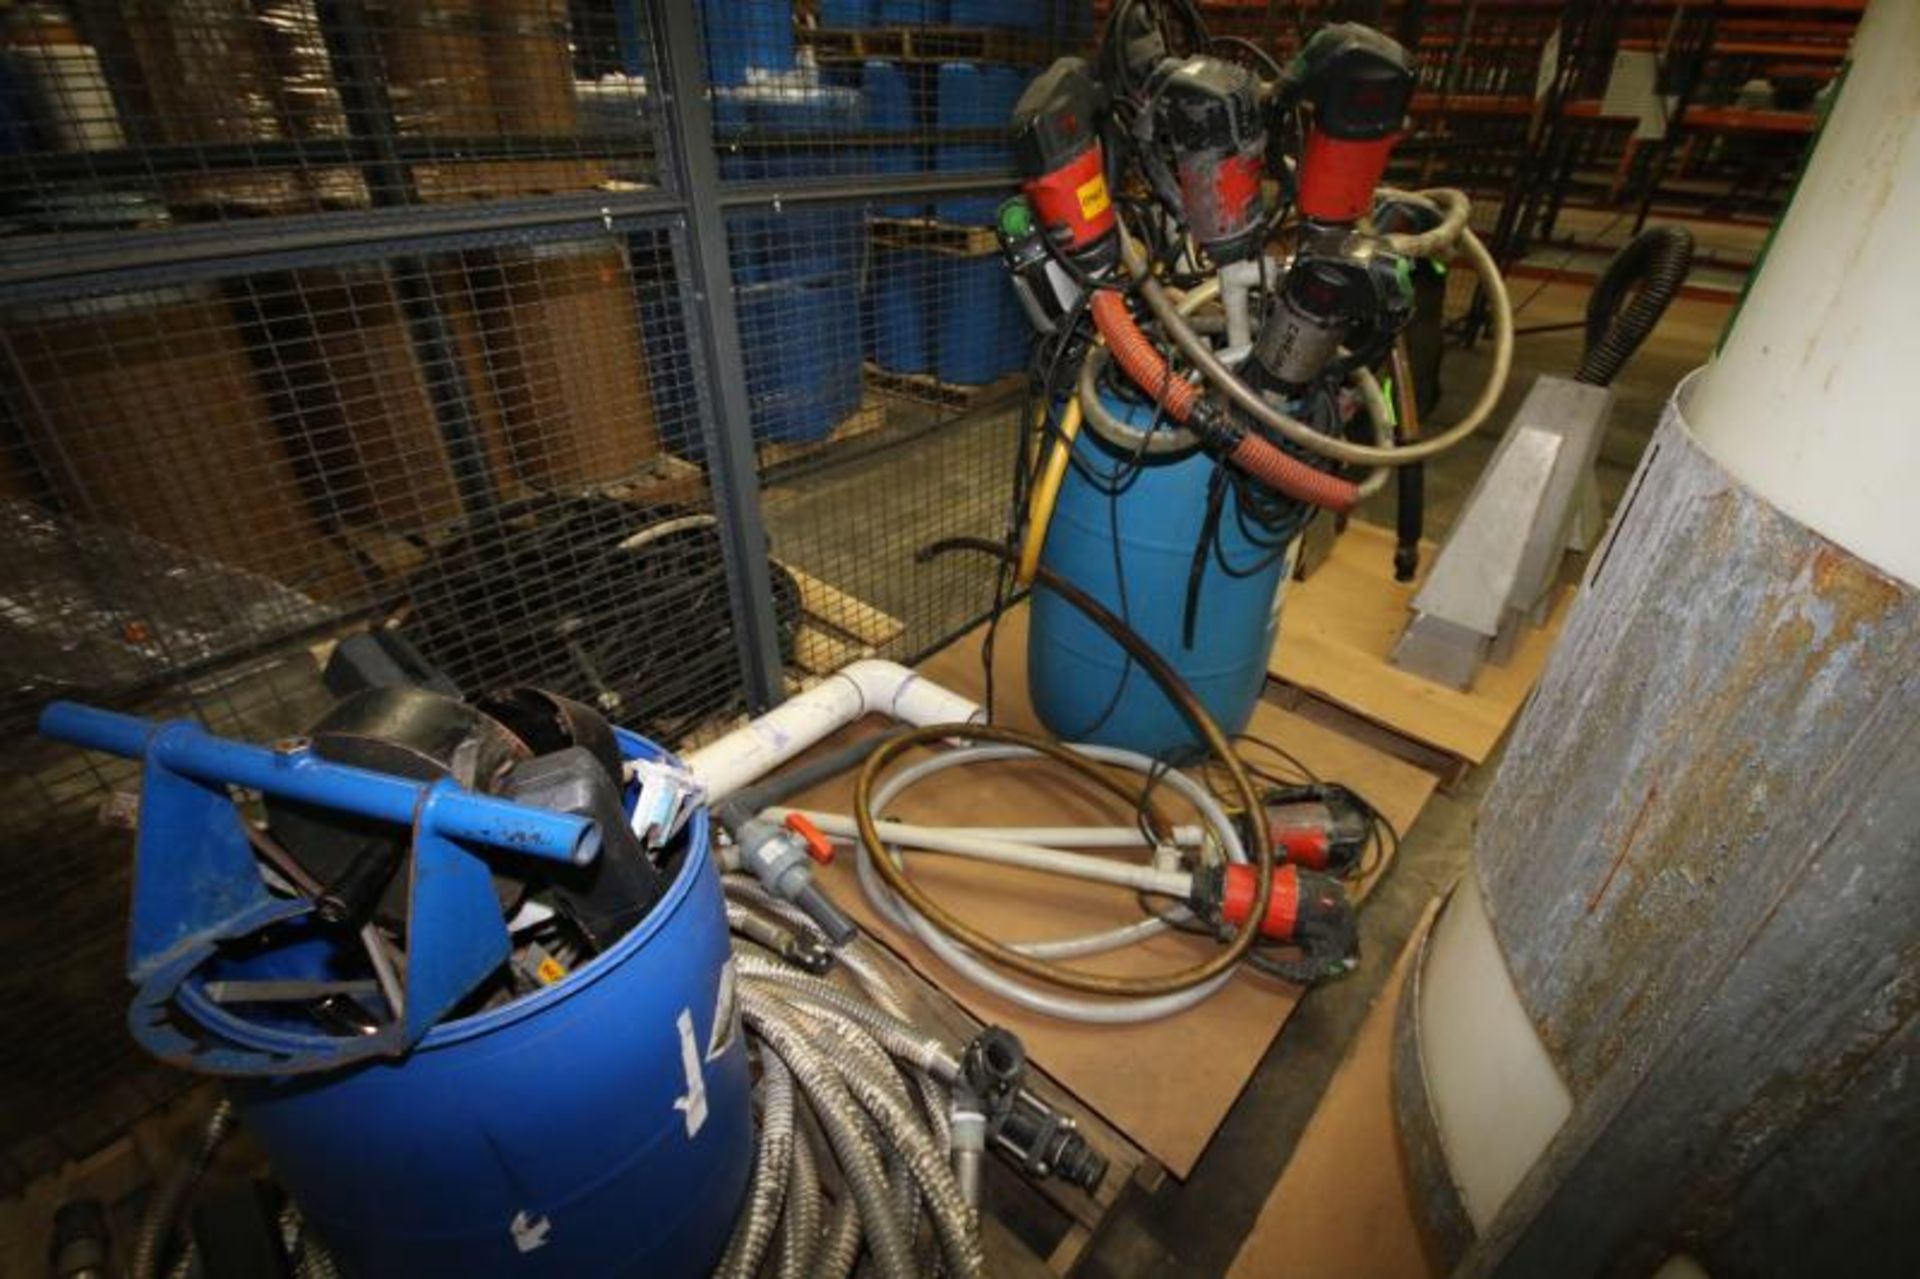 Lot of Assorted Hoses, Duct Work, (12) Flux Pumps, Misc. Fittings, and Other Present Contents on (4) - Image 2 of 4